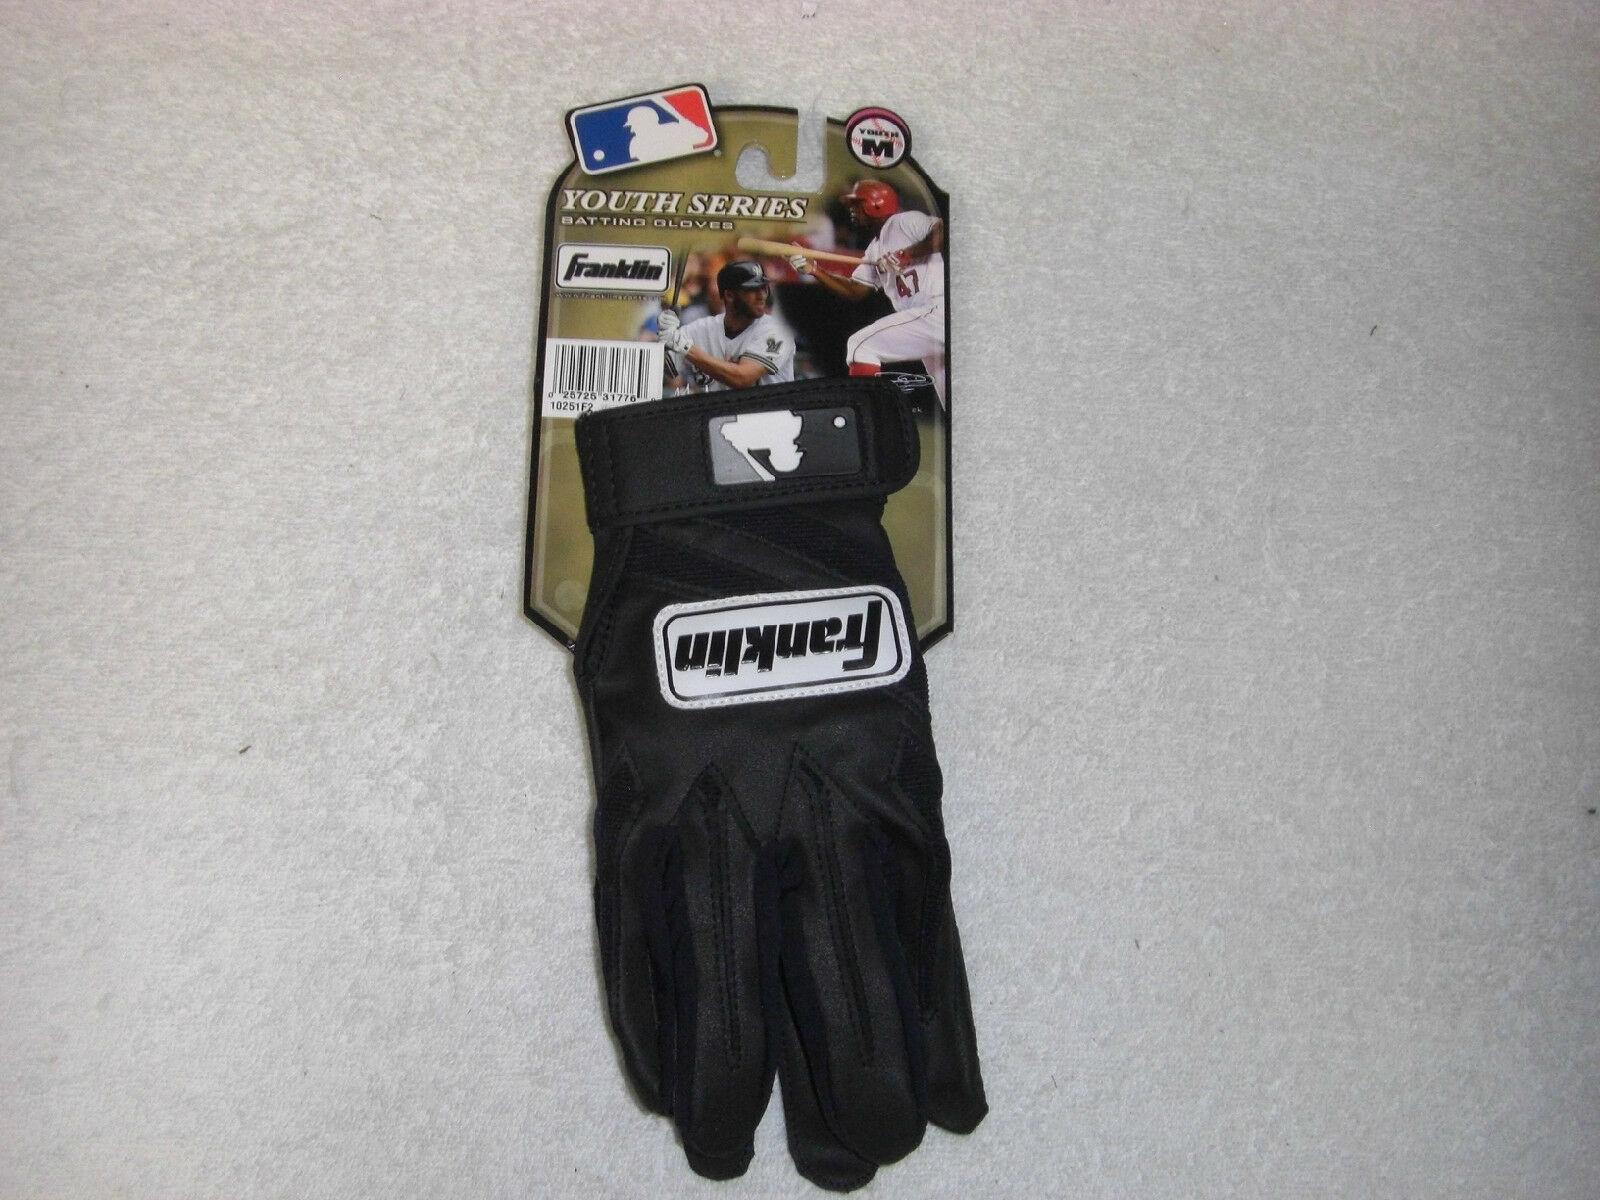 FRANKLIN YOUTH SERIES BATTING GLOVES